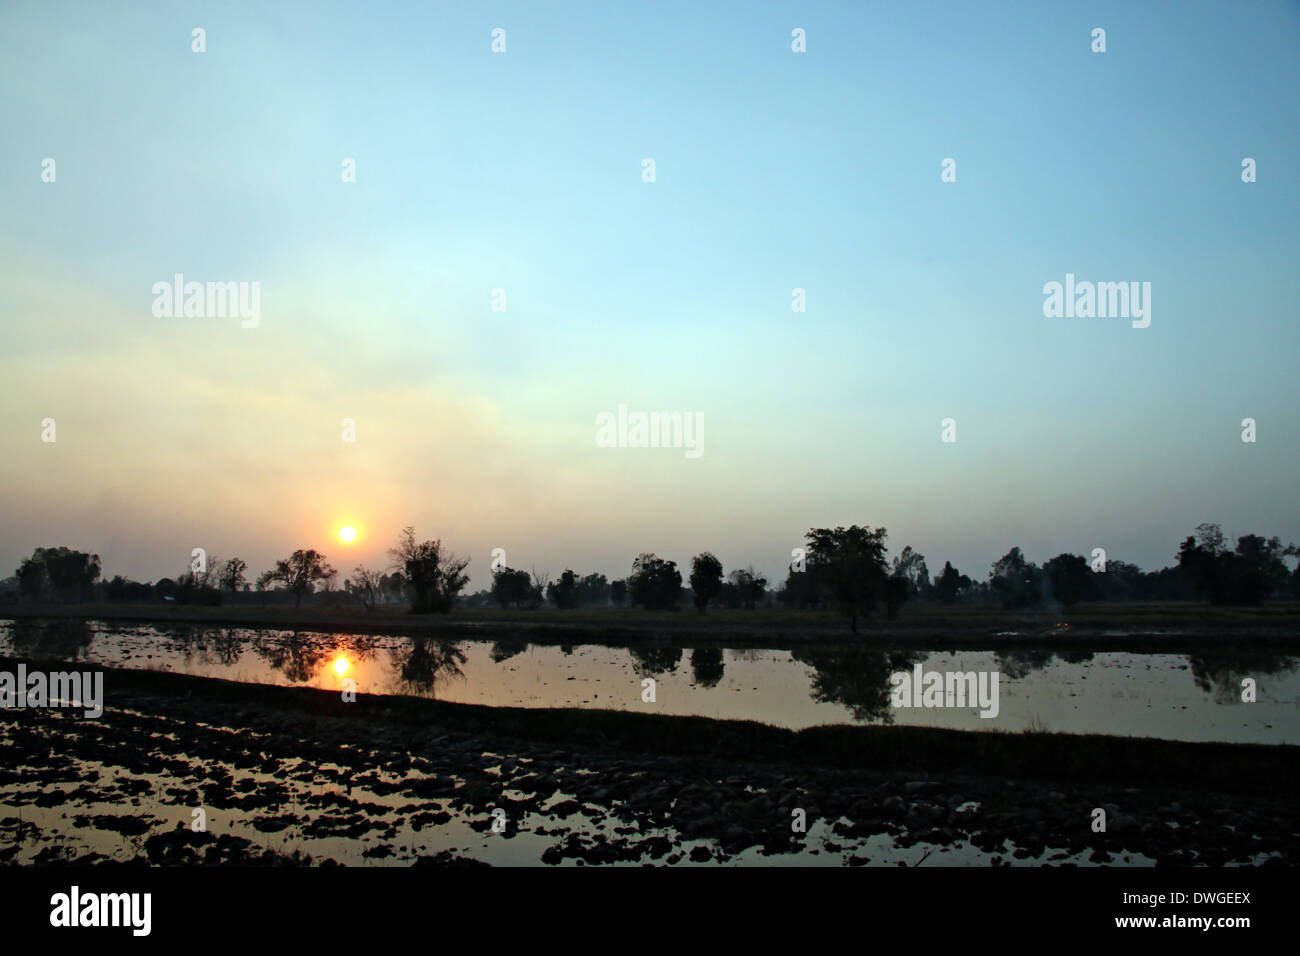 Sunset at the rice farm and light orange reflection on water. Stock Photo